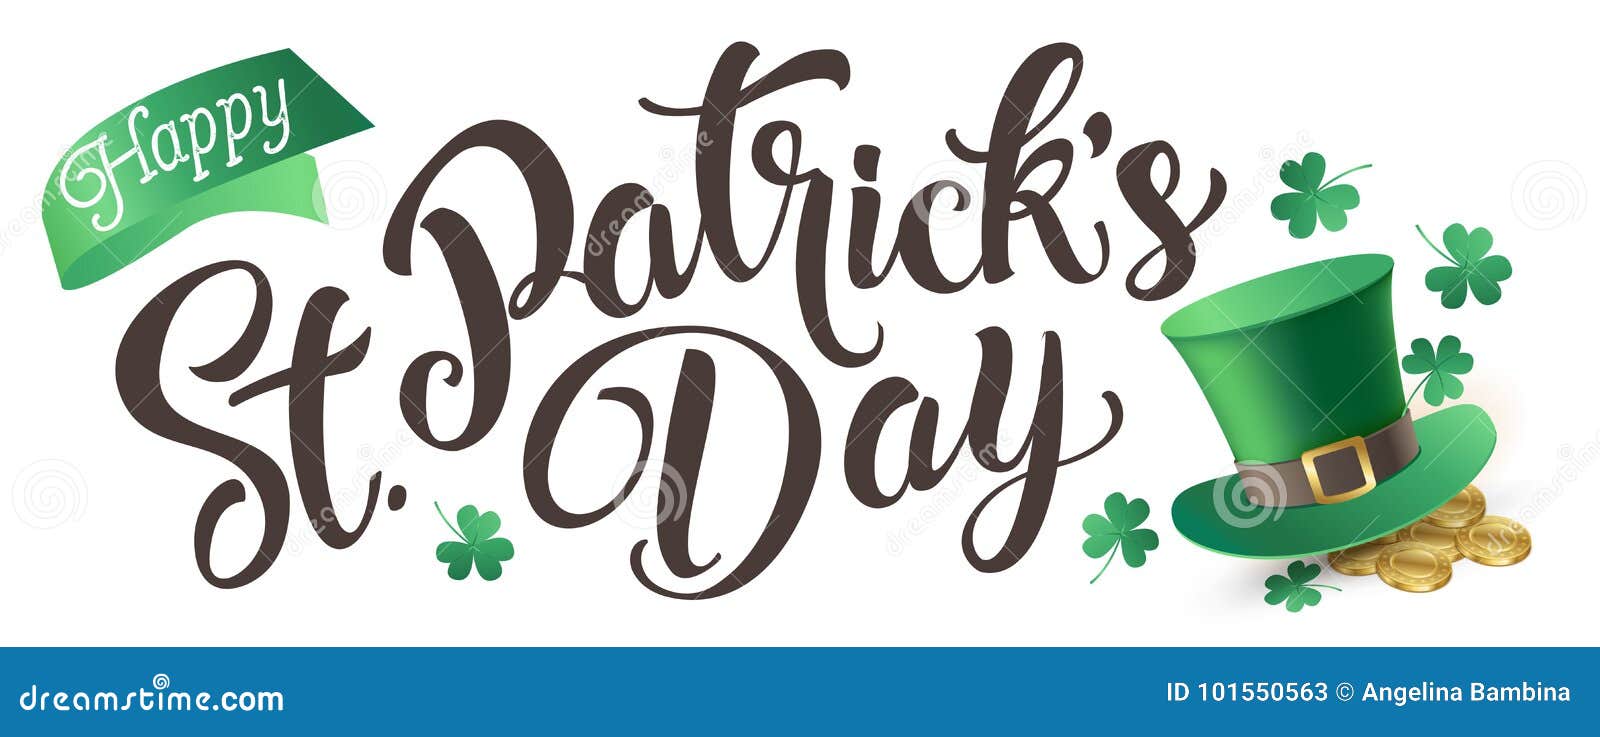 happy st. patrick`s day  on a white background.